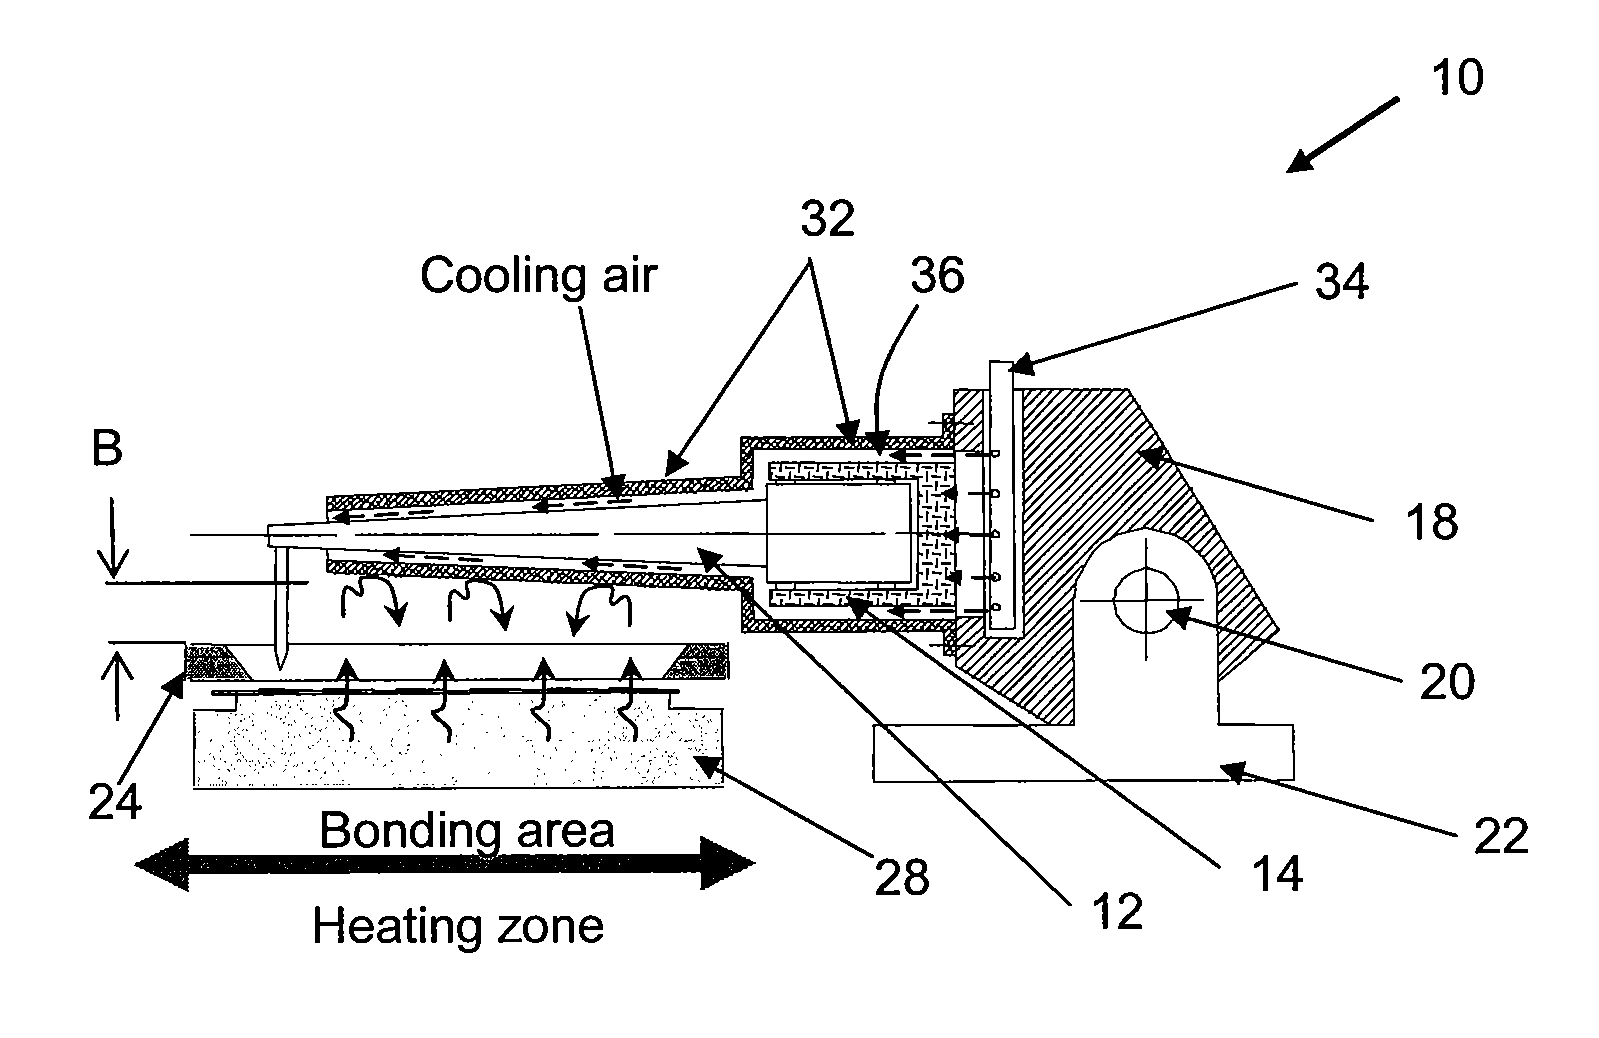 Thermal insulation for a bonding tool